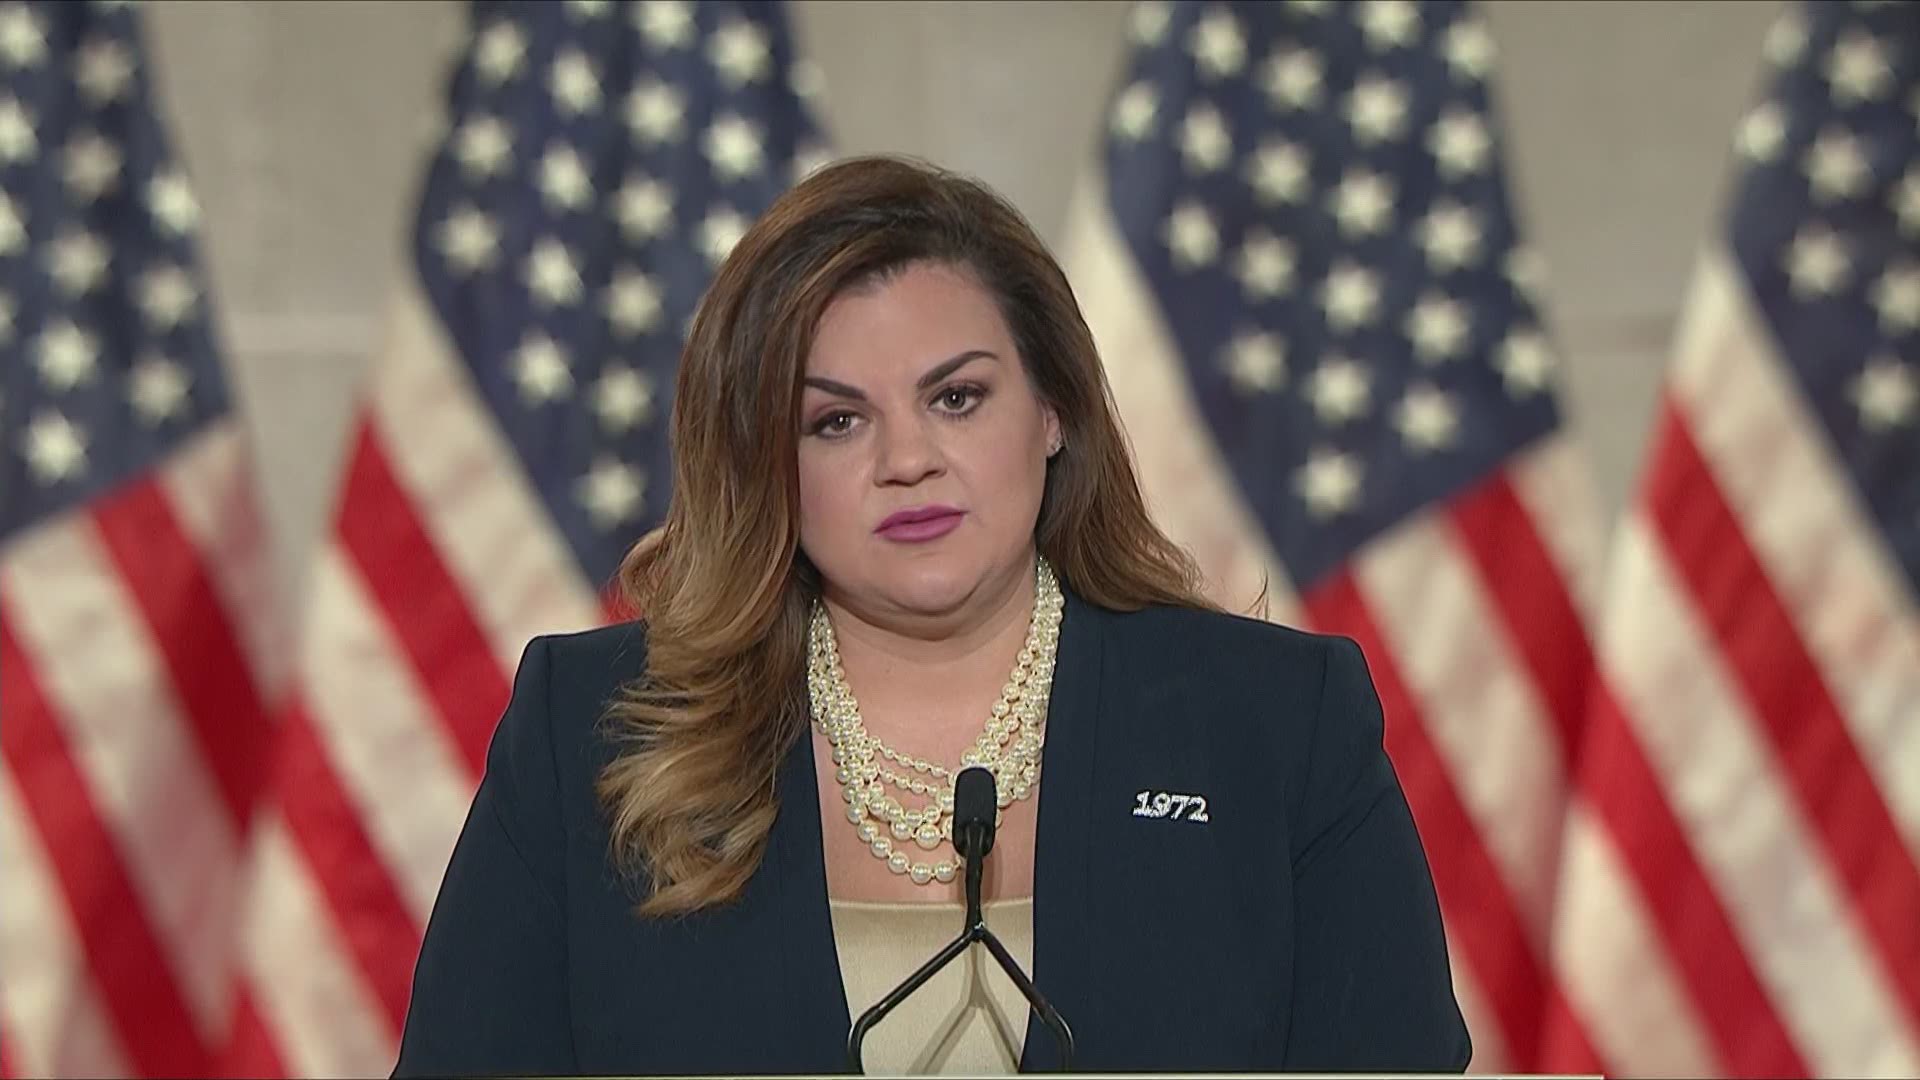 Abby Johnson, a former Planned Parenthood worker who is now an anti-abortion activist, speaks at the Republican National Convention.